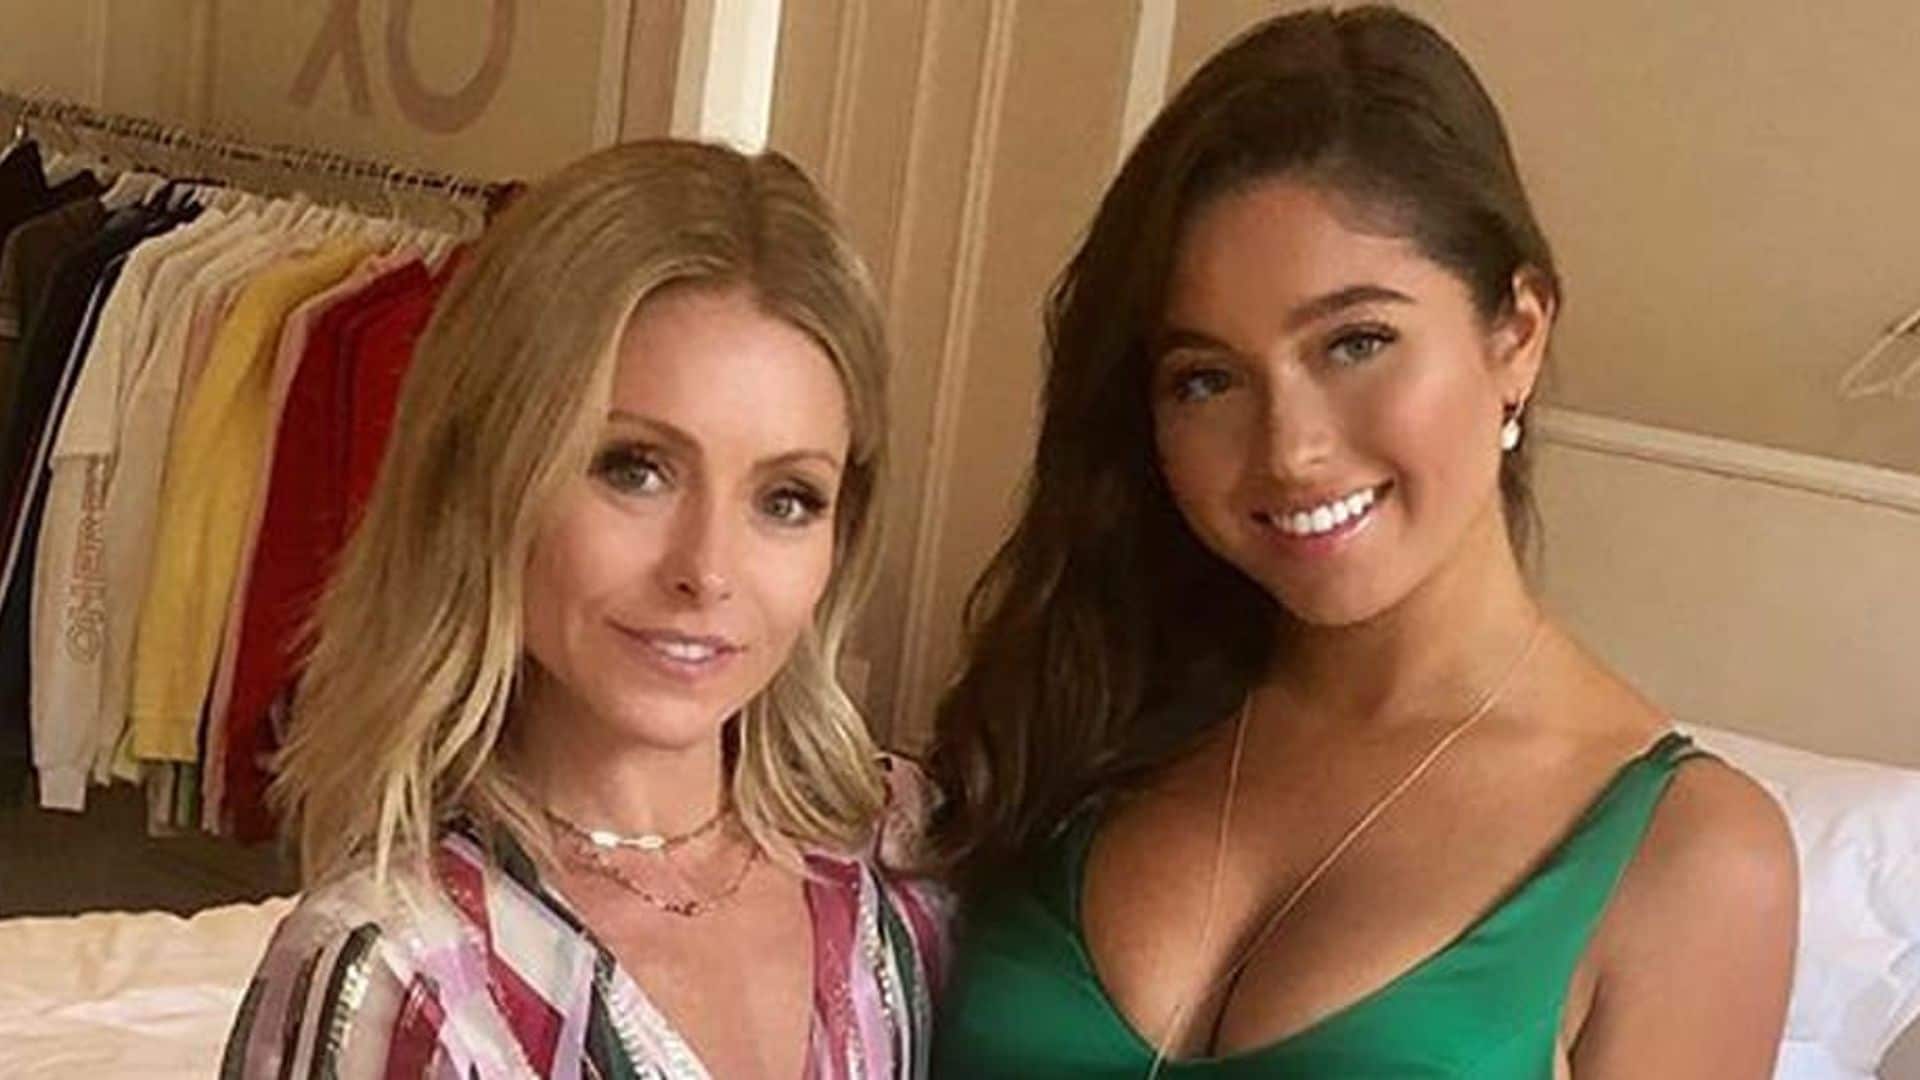 Wowza! Kelly Ripa's daughter Lola is all grown up and gorgeous for Prom!